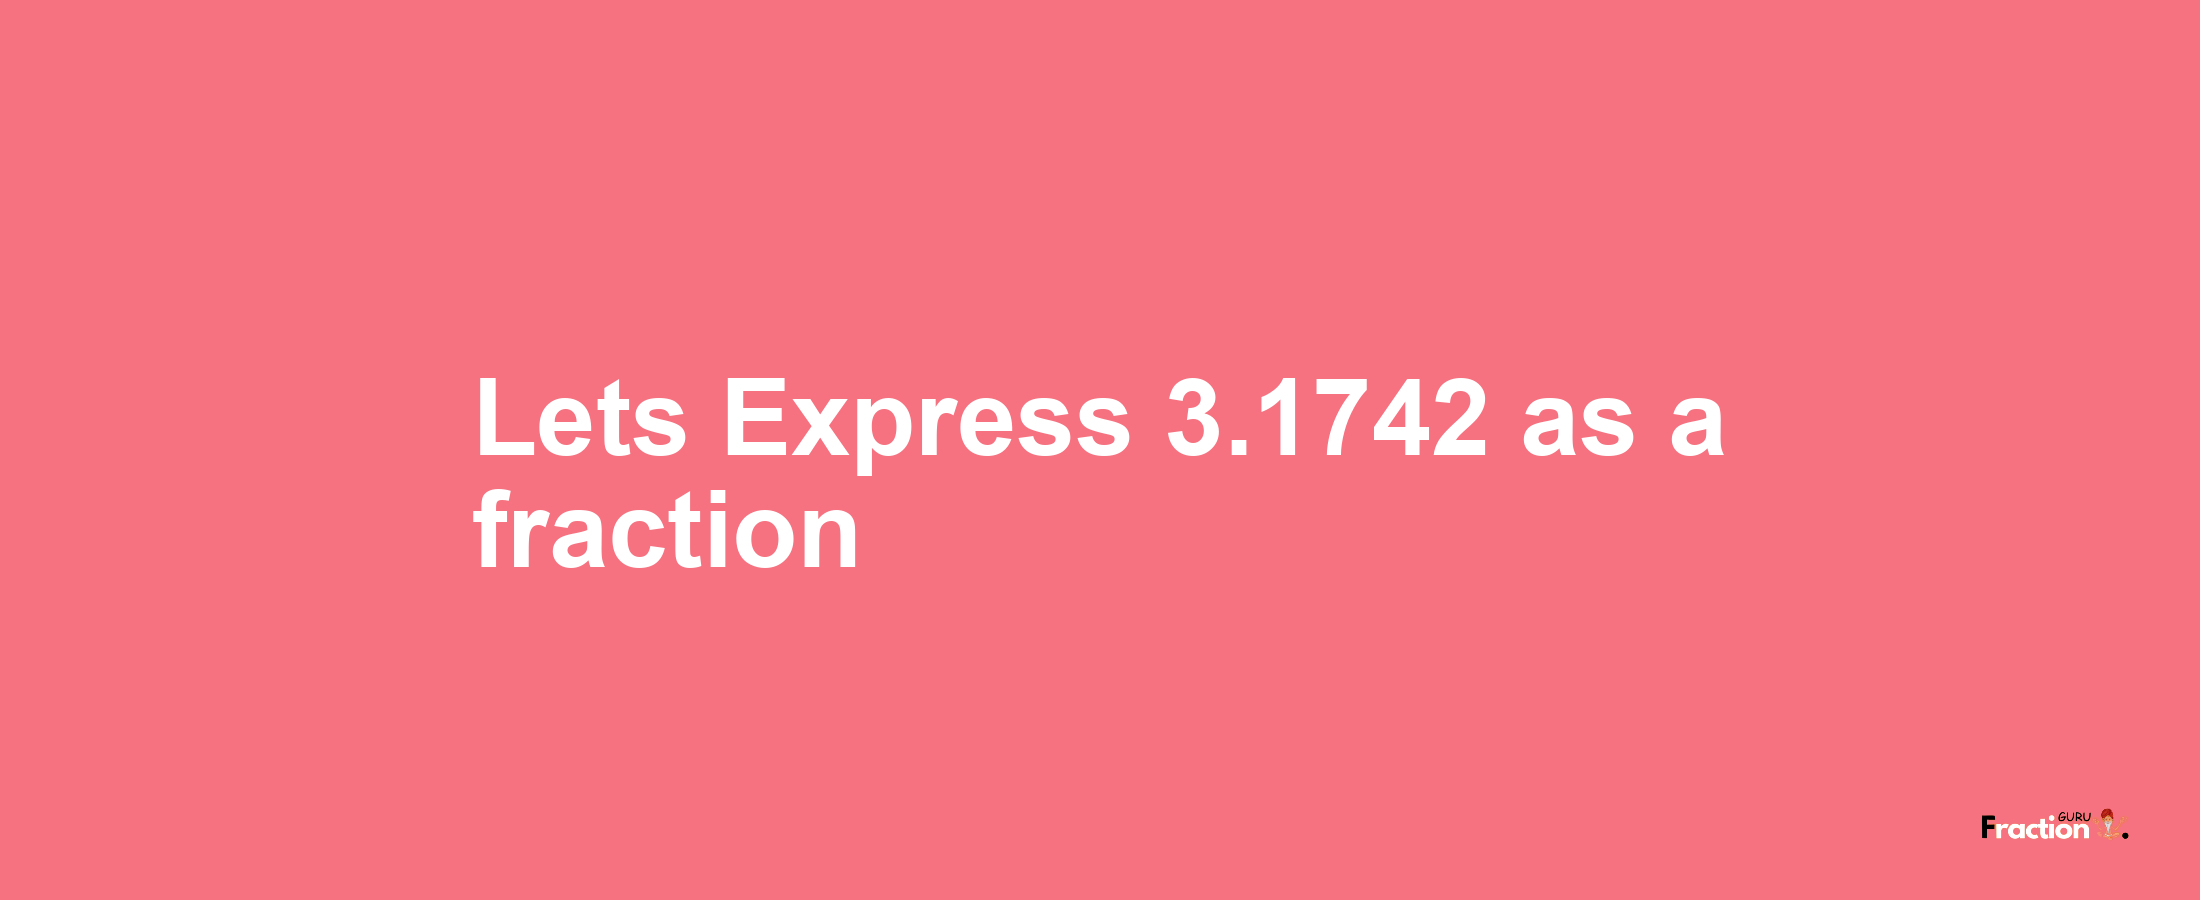 Lets Express 3.1742 as afraction